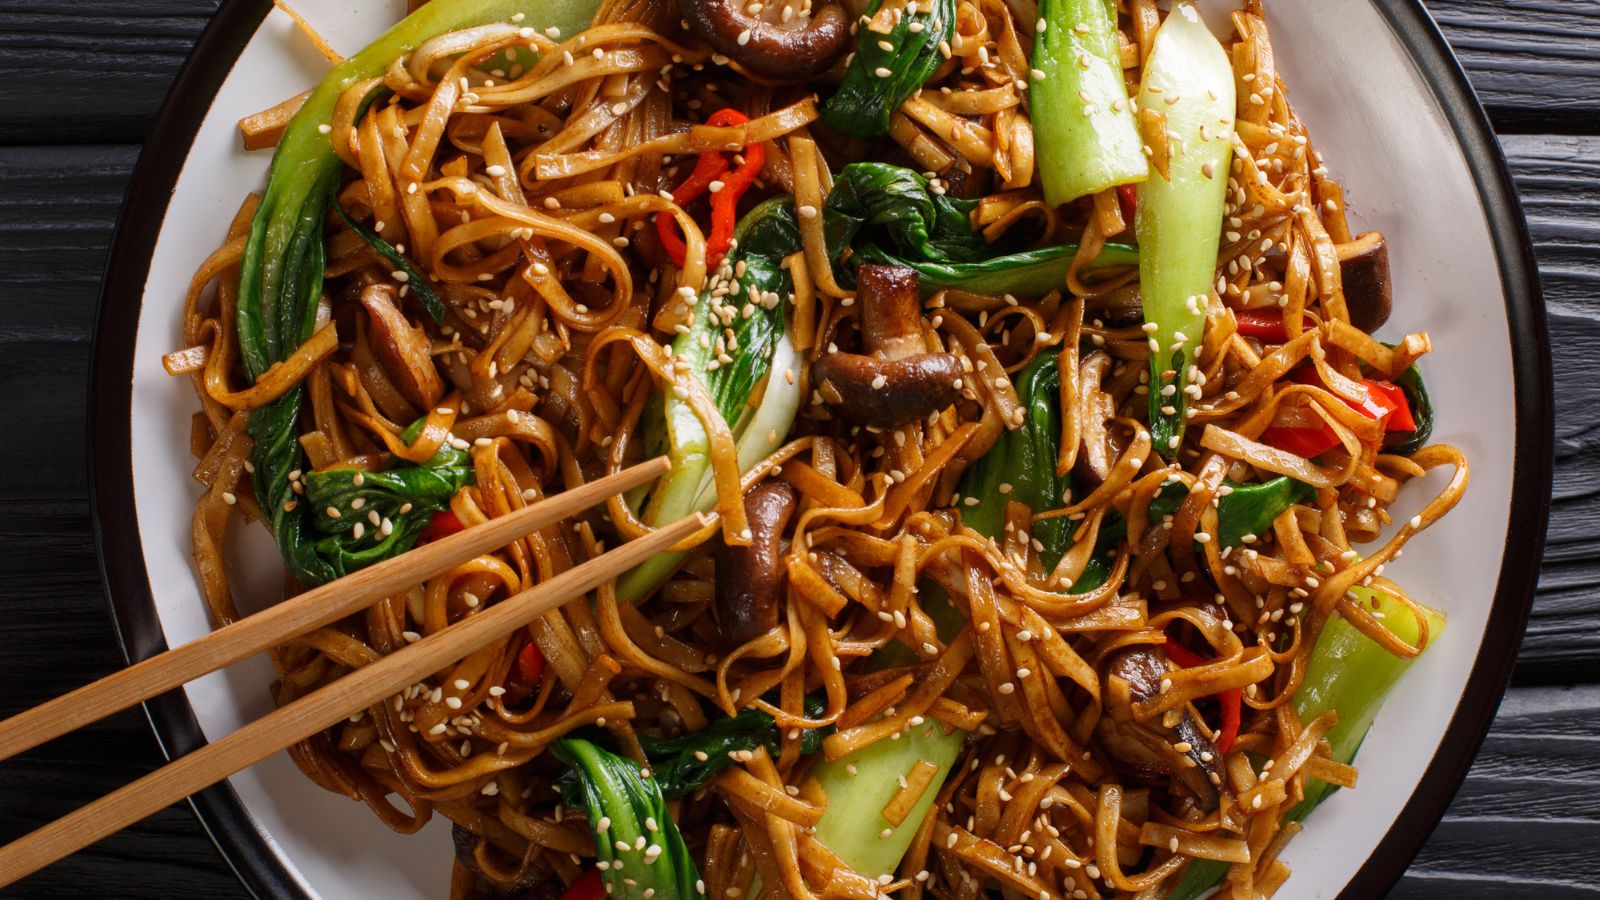 Whip Up Fast 18 Delicious Dinners Using Just A Wok!